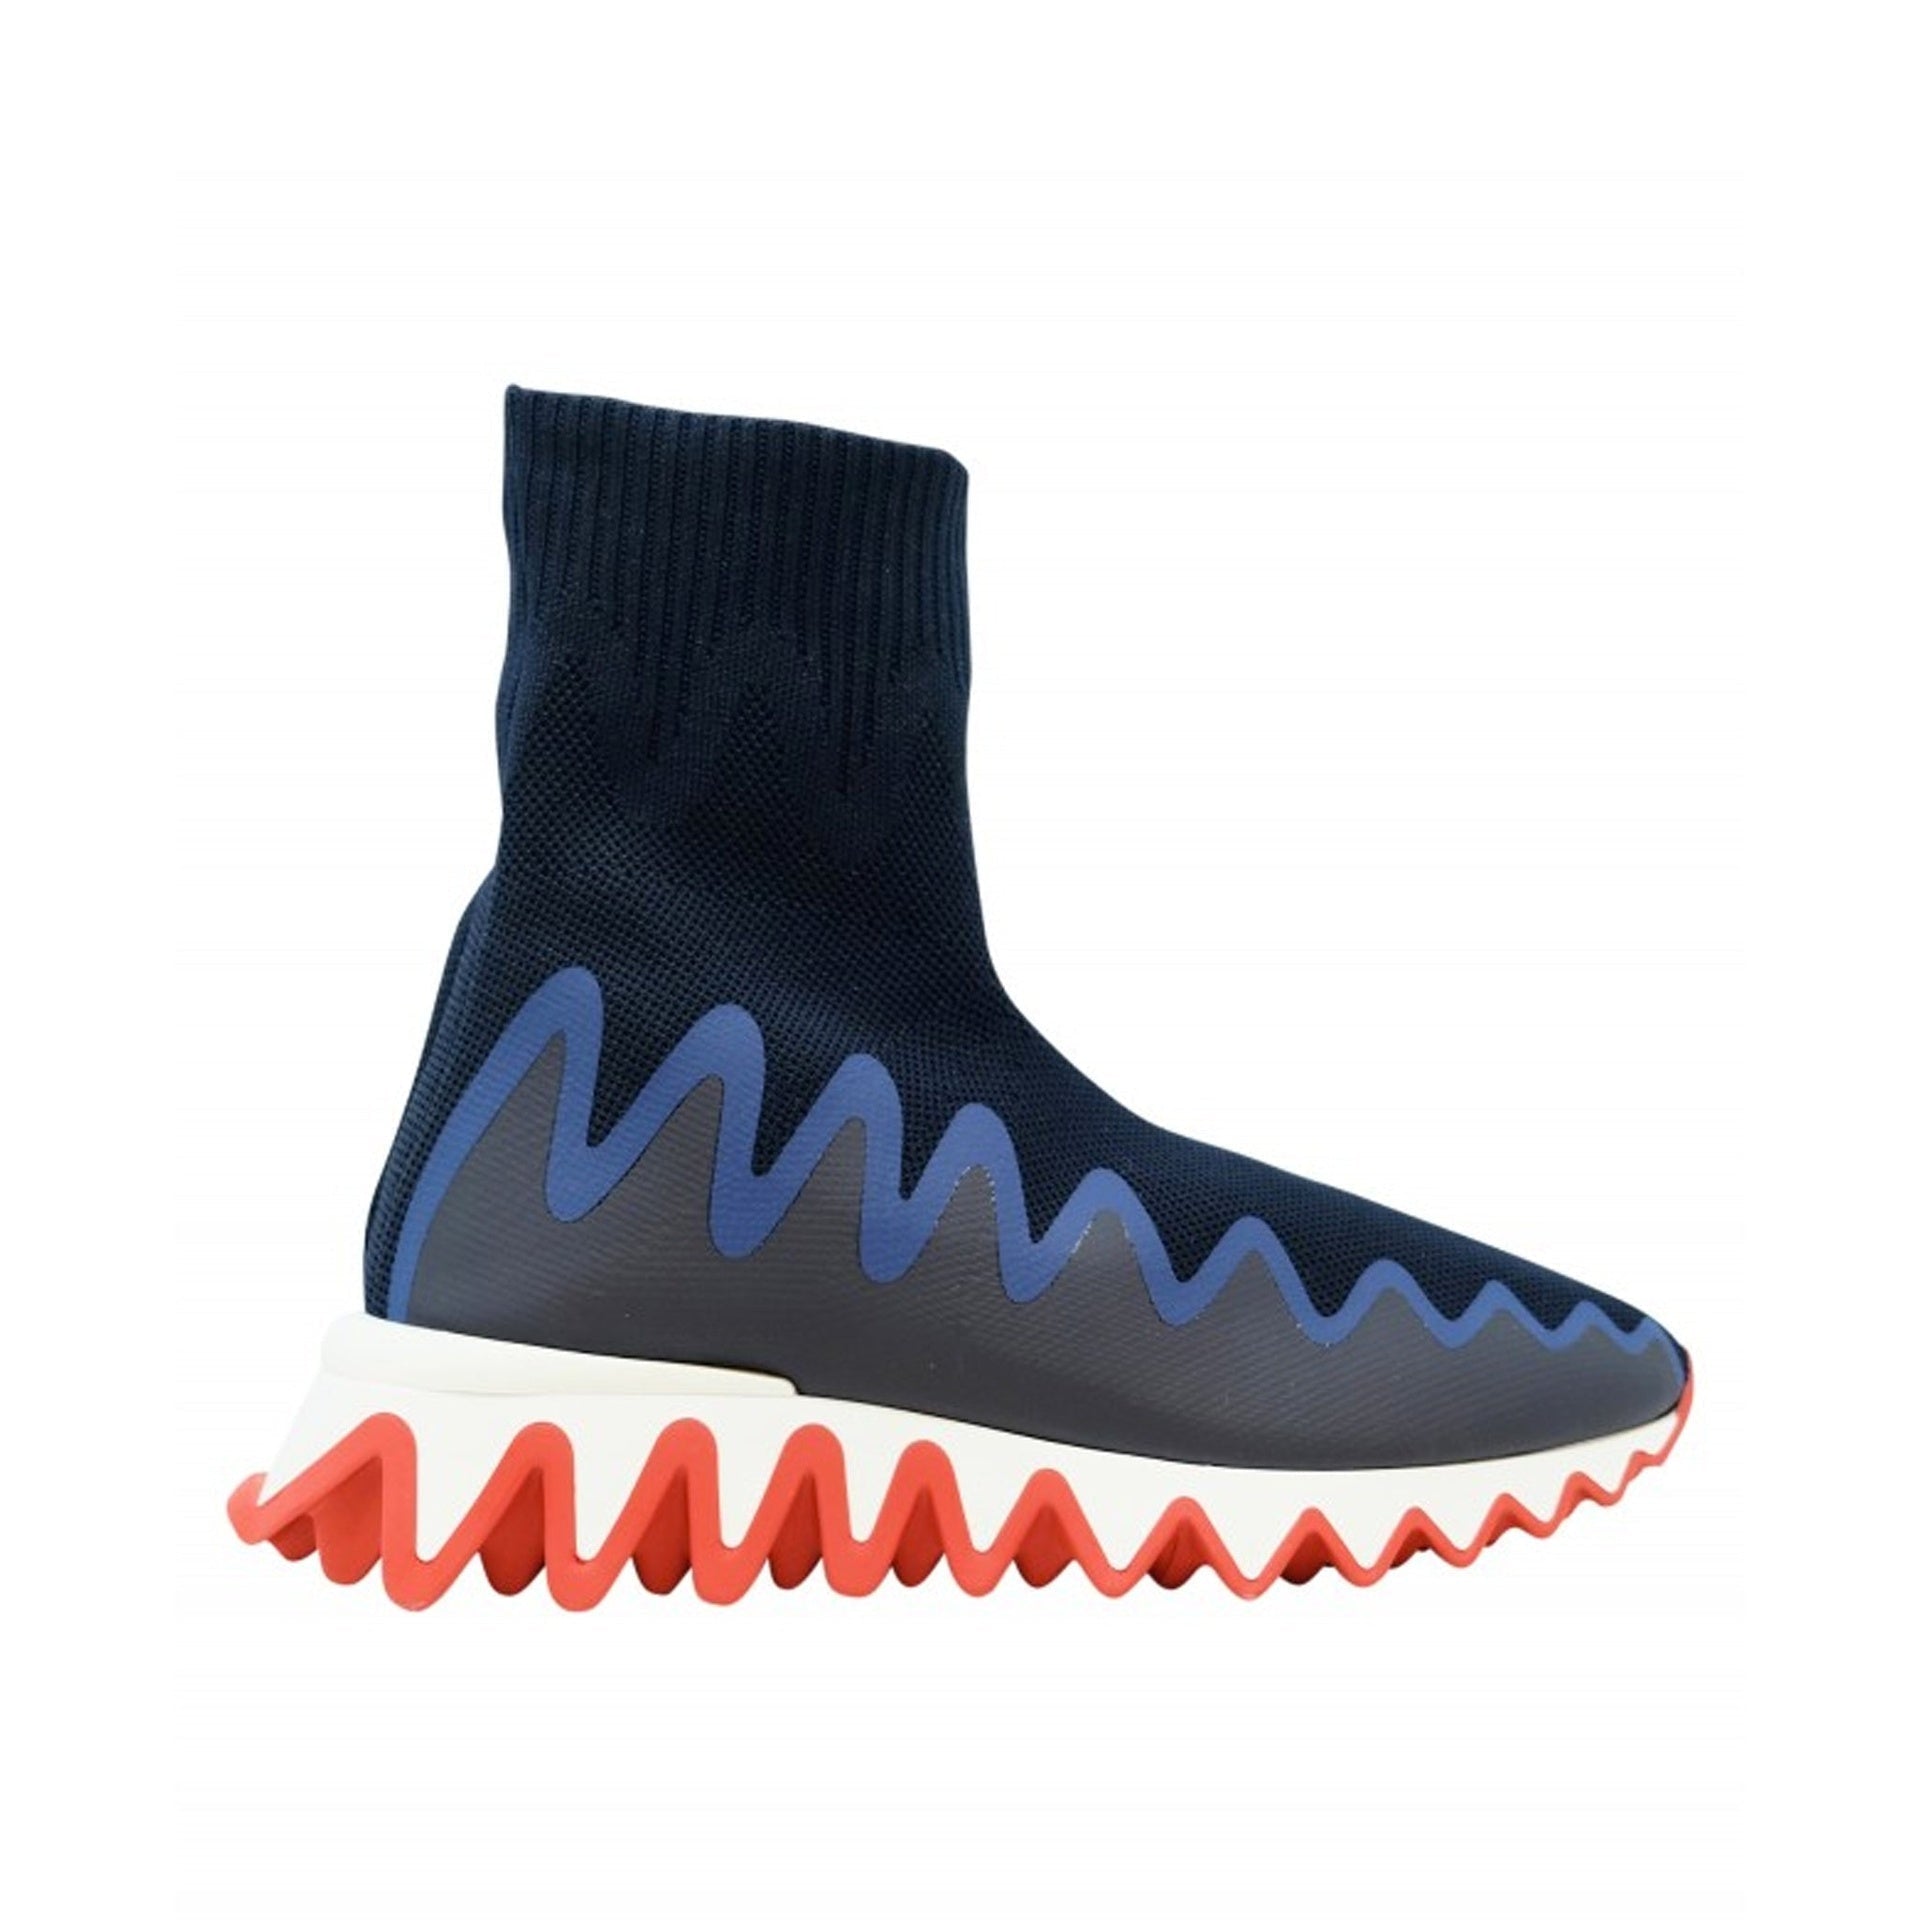 CHRISTIAN-LOUBOUTIN-OUTLET-SALE-Christian-Louboutin-Sharky-Sock-Sneakers-Sneakers-BLUE-37-ARCHIVE-COLLECTION.jpg